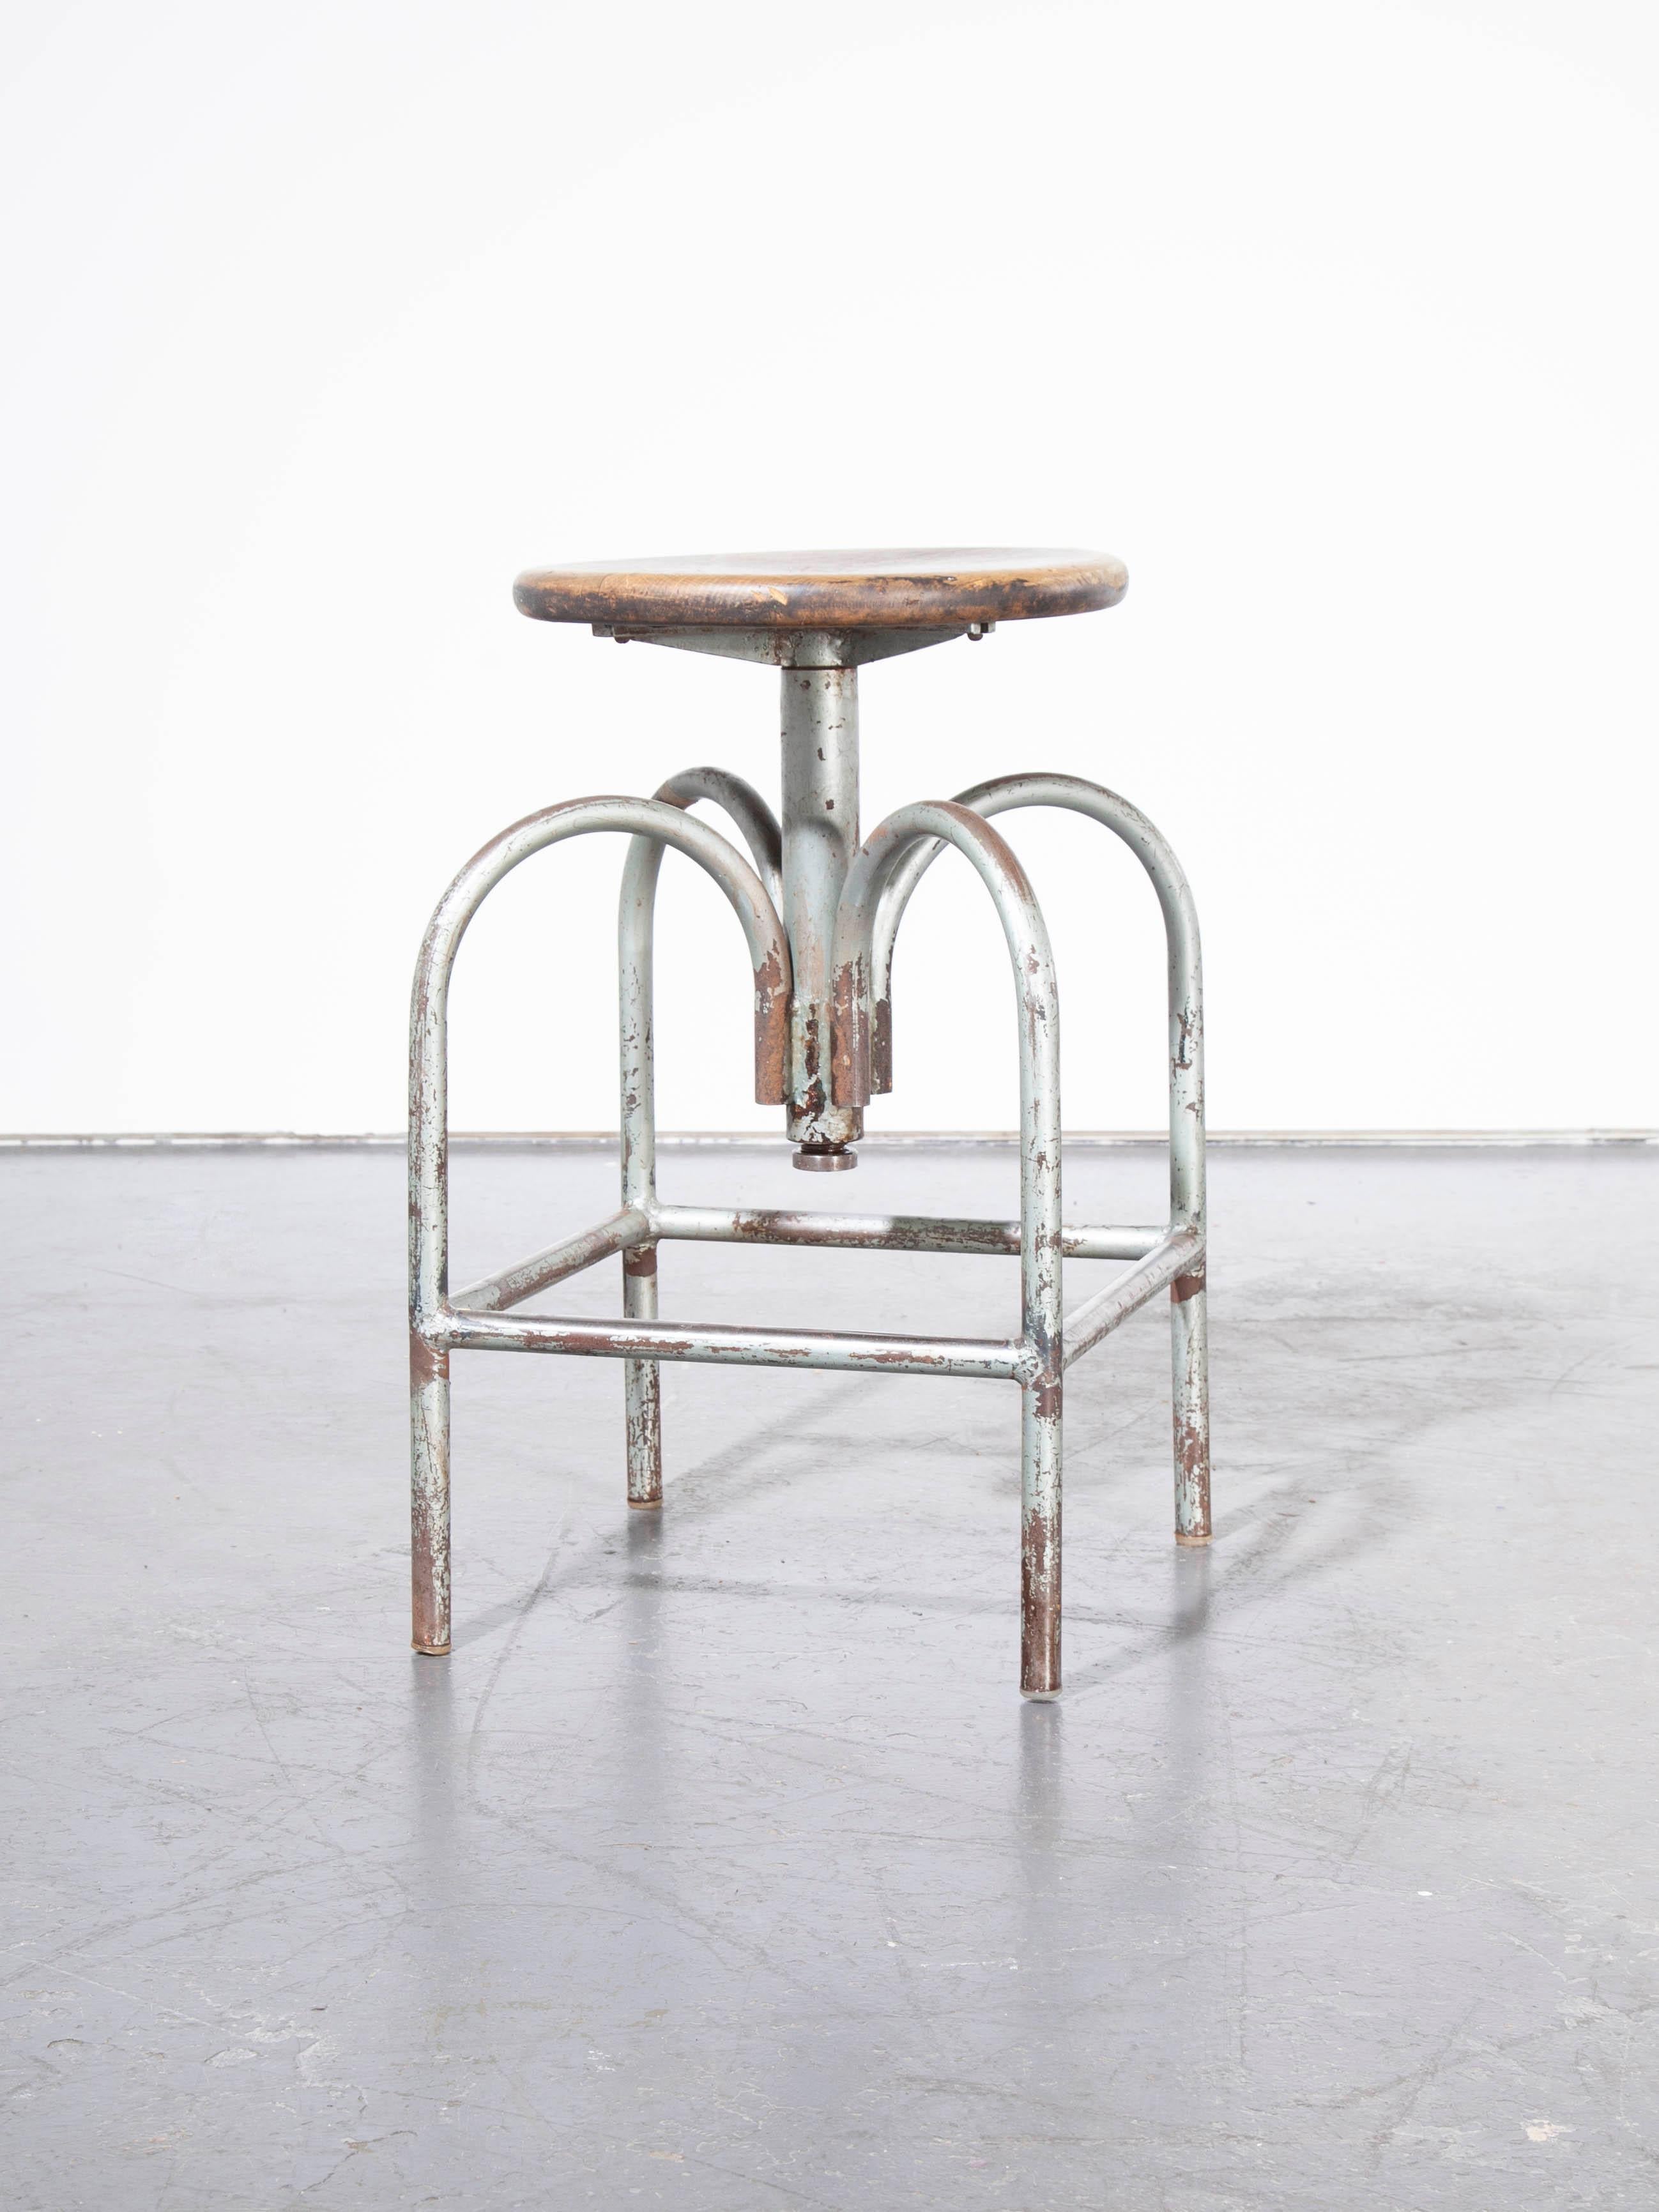 1950s Heliolithe Industrial swivelling stool – model 1

1950s Heliolithe Industrial swivelling stool – model 1. Fabulous honest Industrial French stool with graceful arched base, original weathered paint and a spun solid beech seat. Measures: